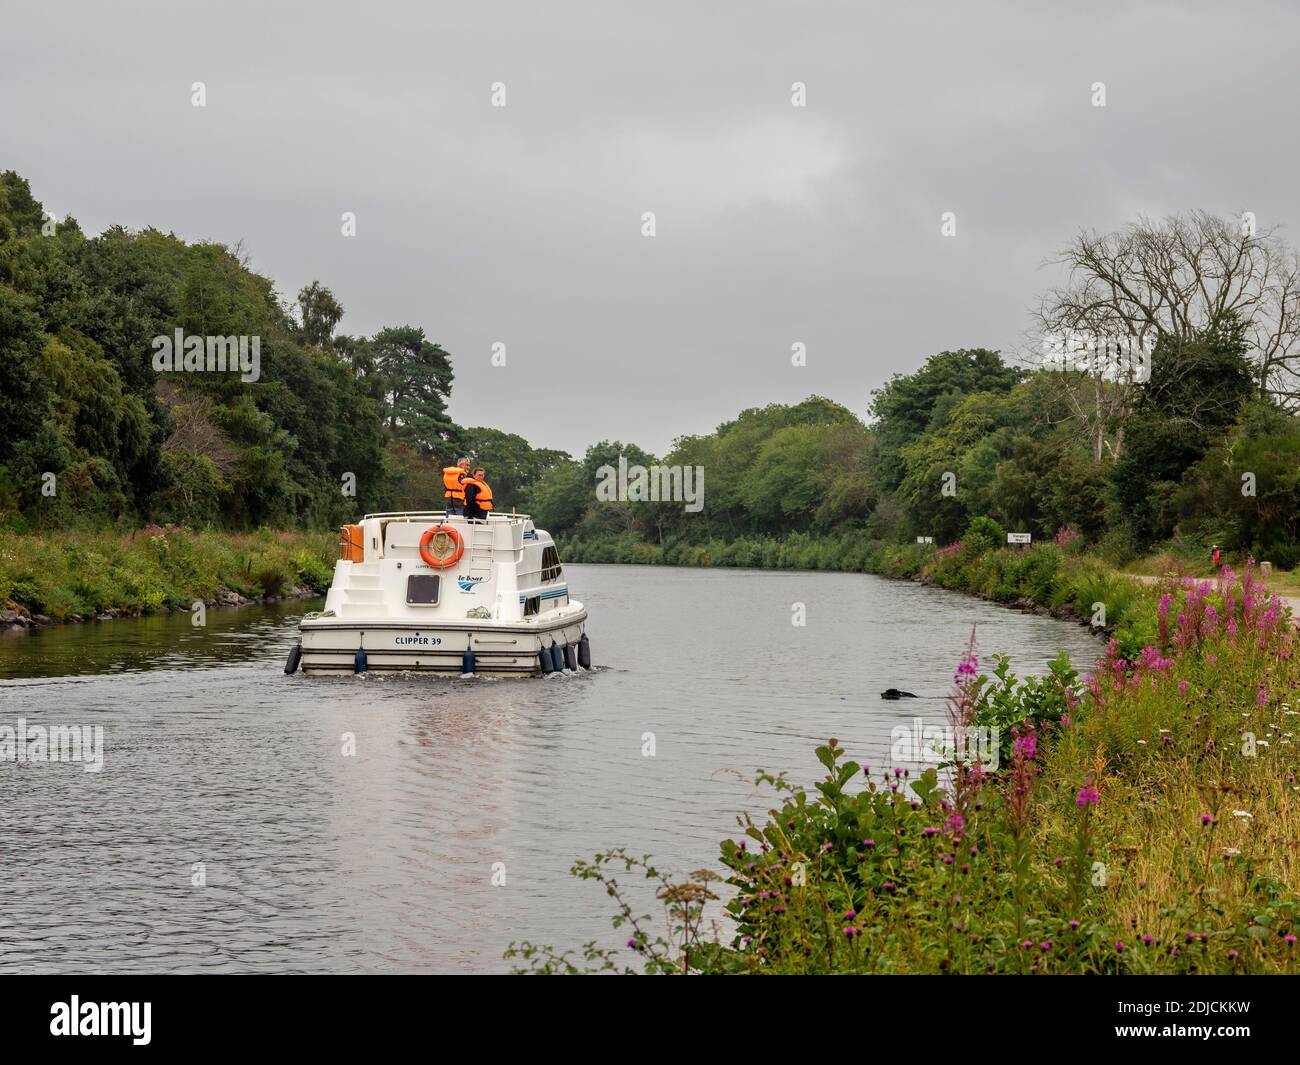 People on a pleasure boat watch a dog retrieving a ball from the Caledonian Canal near Inverness, Highland, Scotland Stock Photo